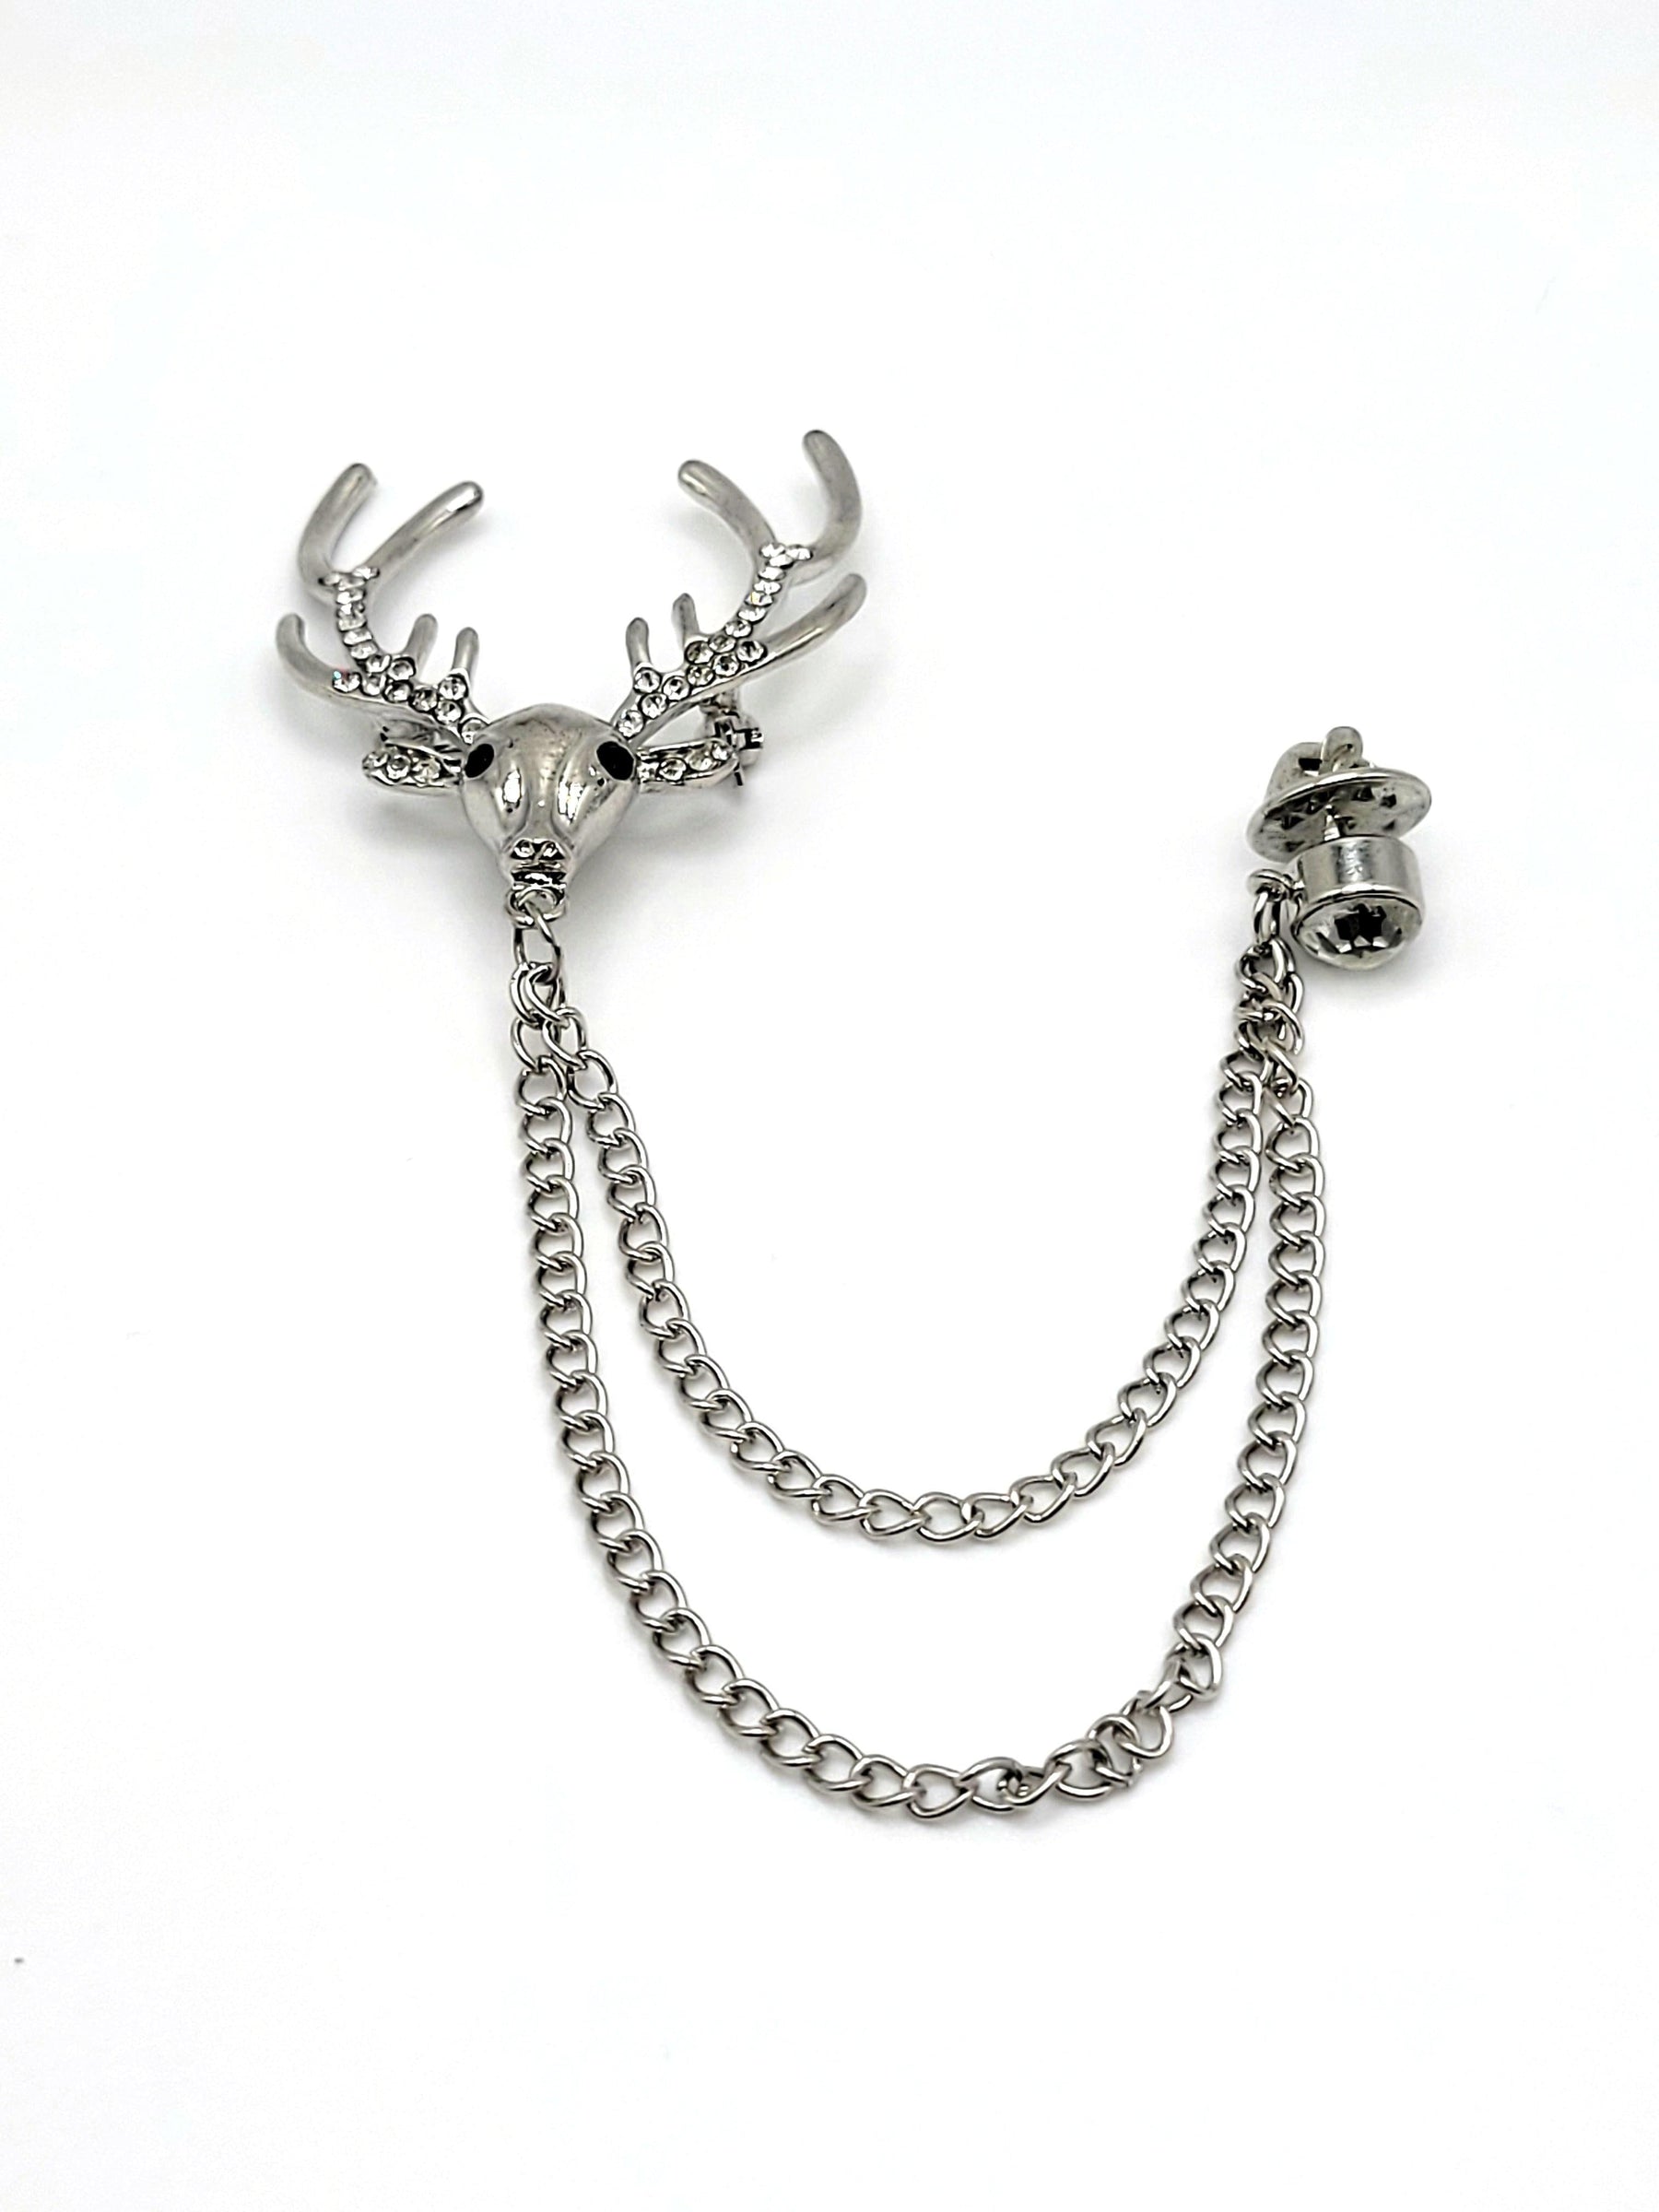 Stag Lapel Chain - The Upscale Banker